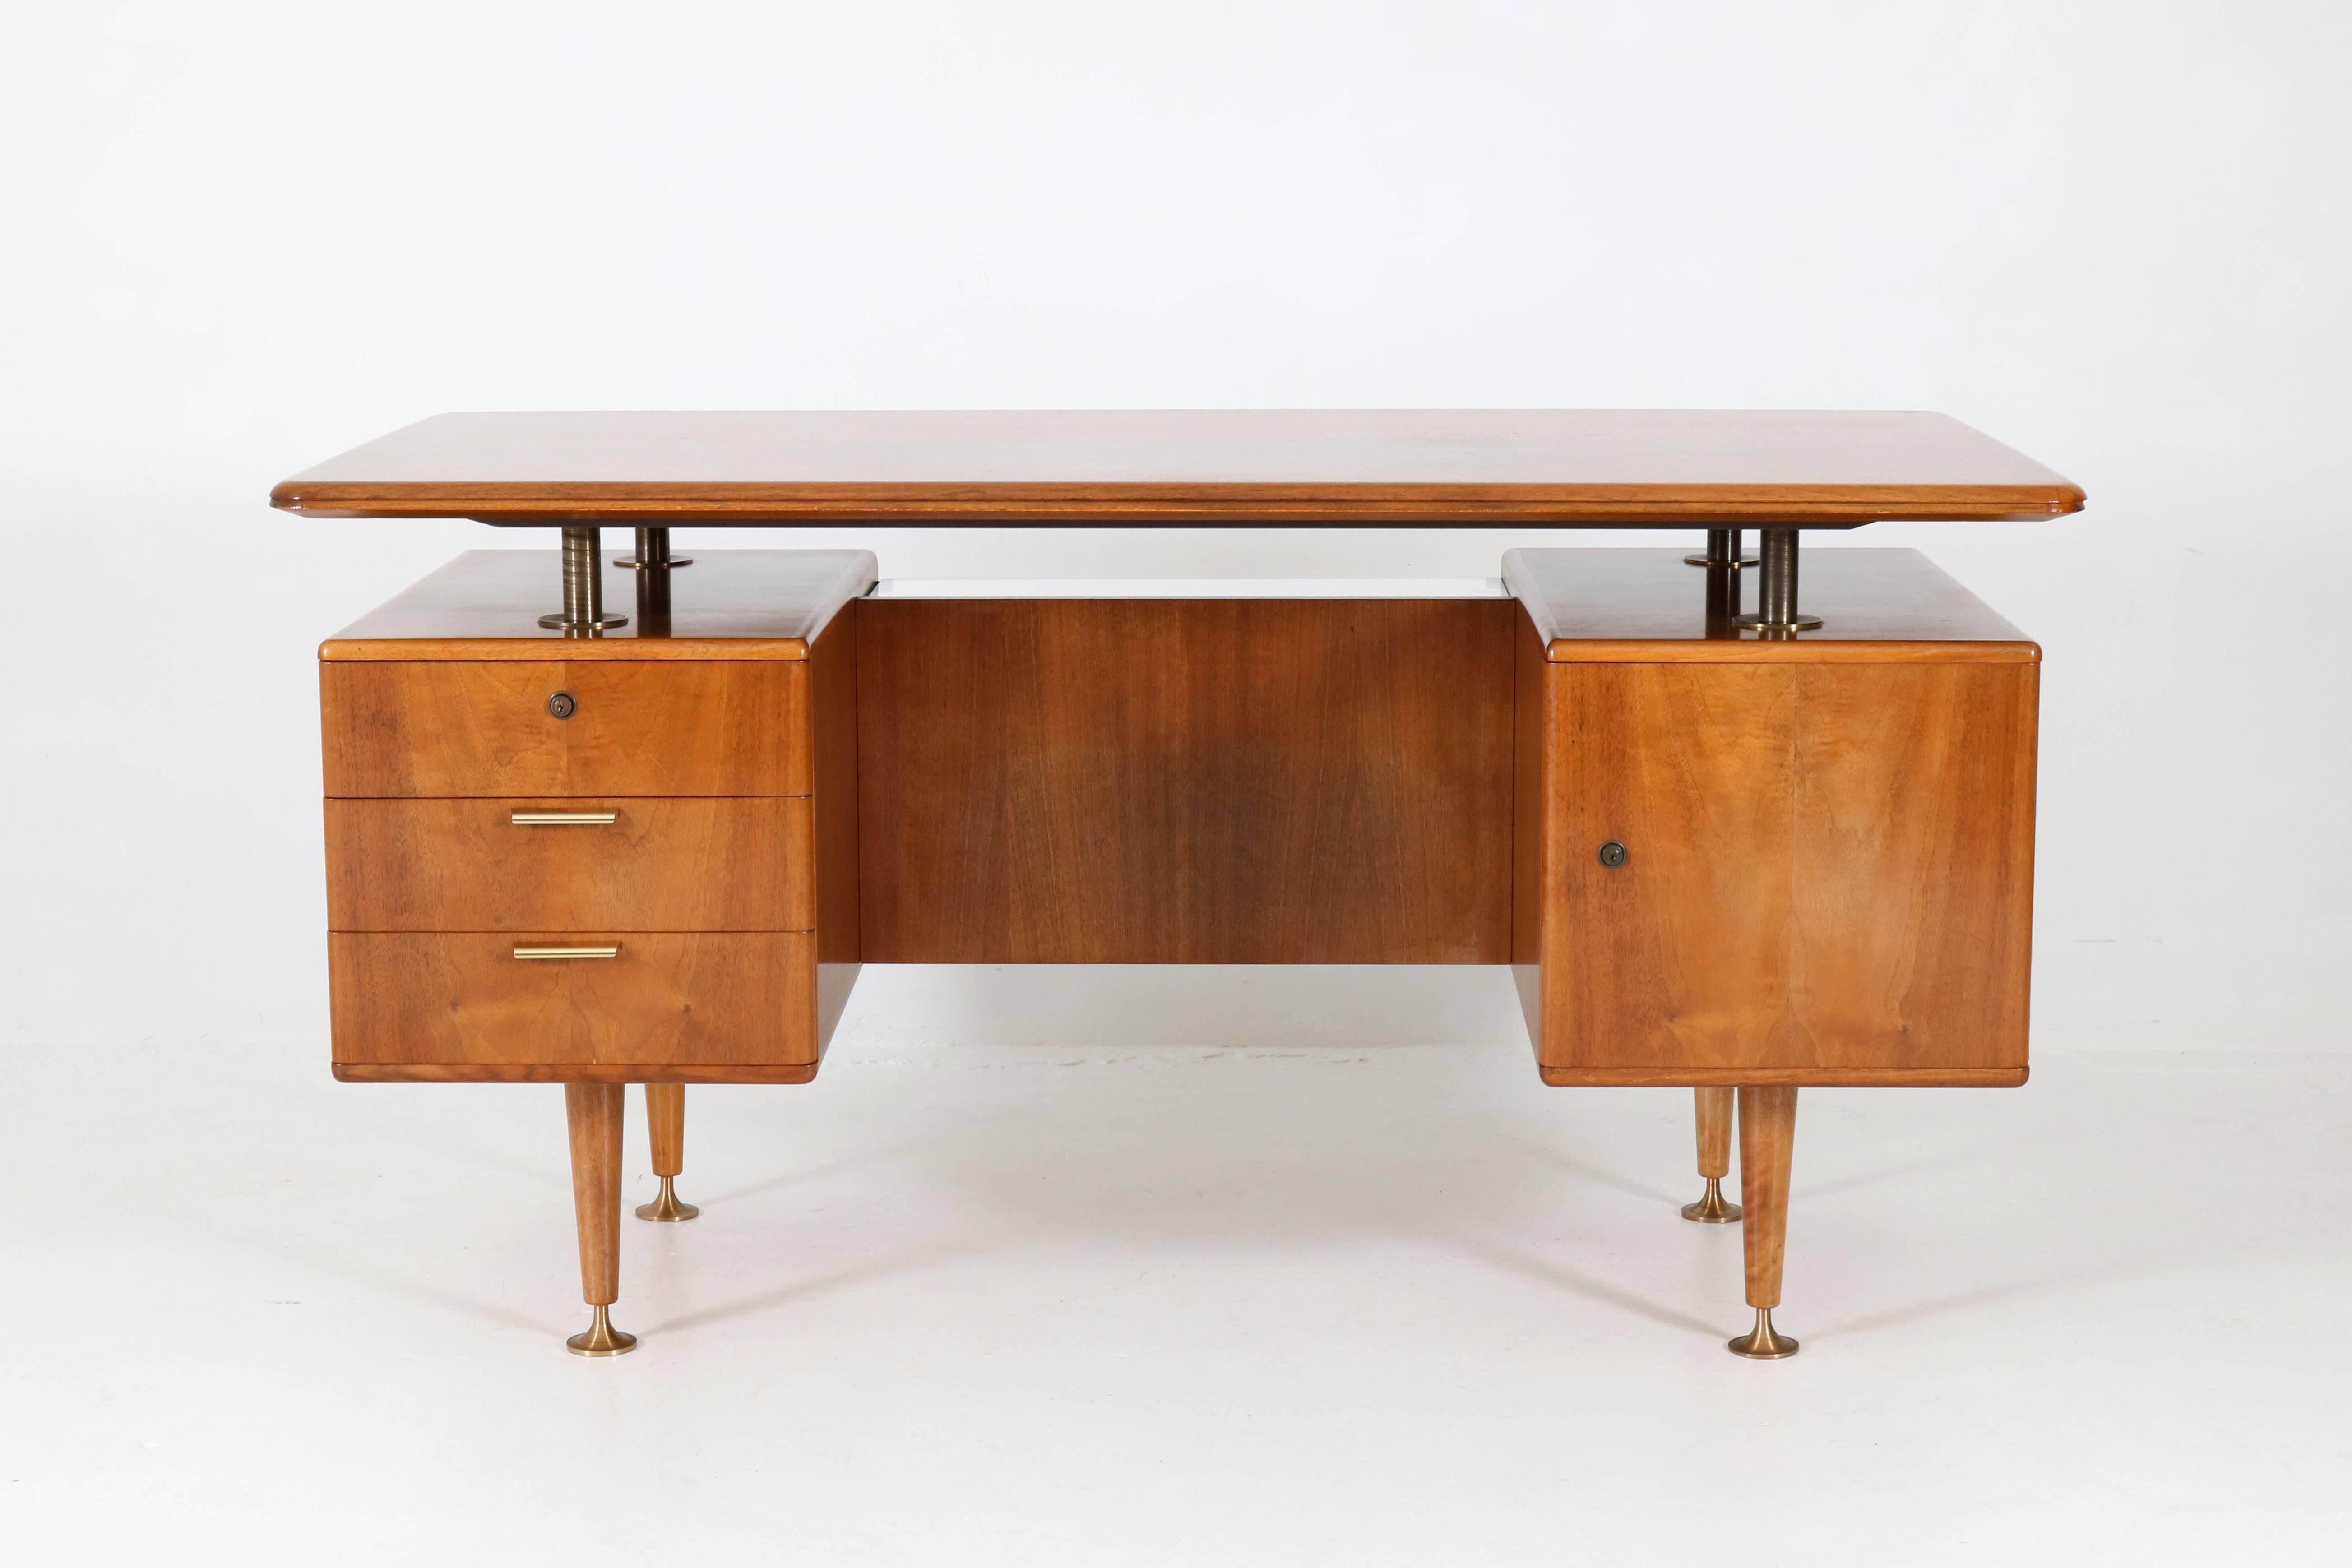 Elegant Mid-Century Modern floating top desk by A.A.Patijn for Poly-Z.
Striking Dutch design from the 1960s.
Walnut with solid brass handles and feet.
Two original glass shelves at the back of the desk.

On the top there is a darker spot